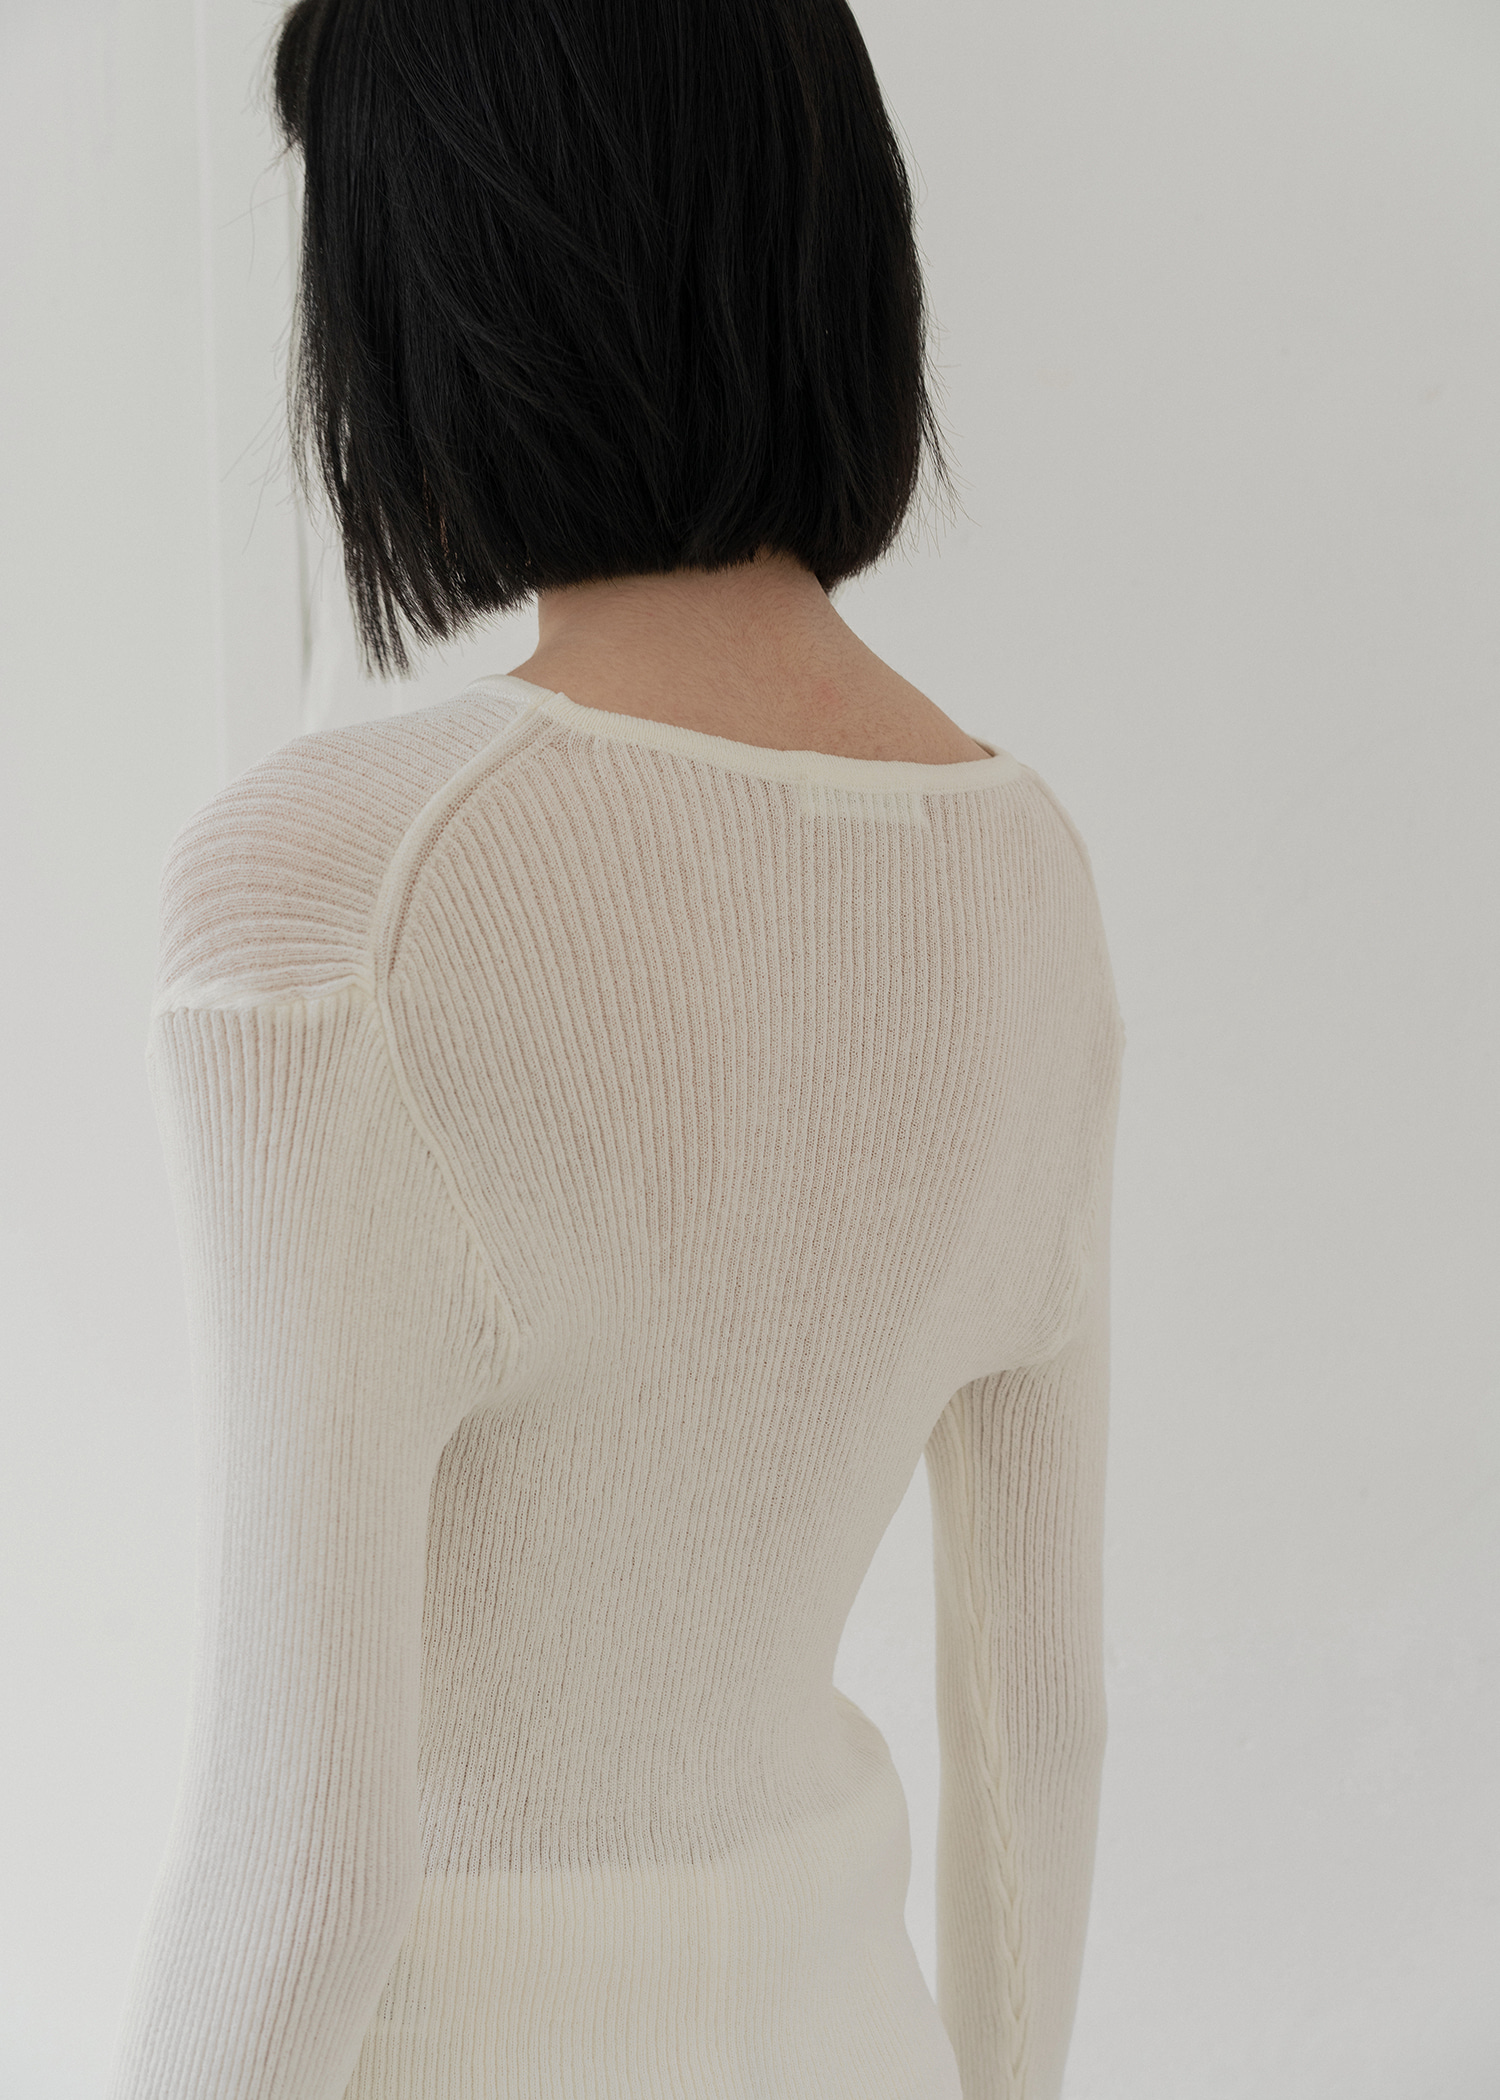 See-through long-sleeved knit